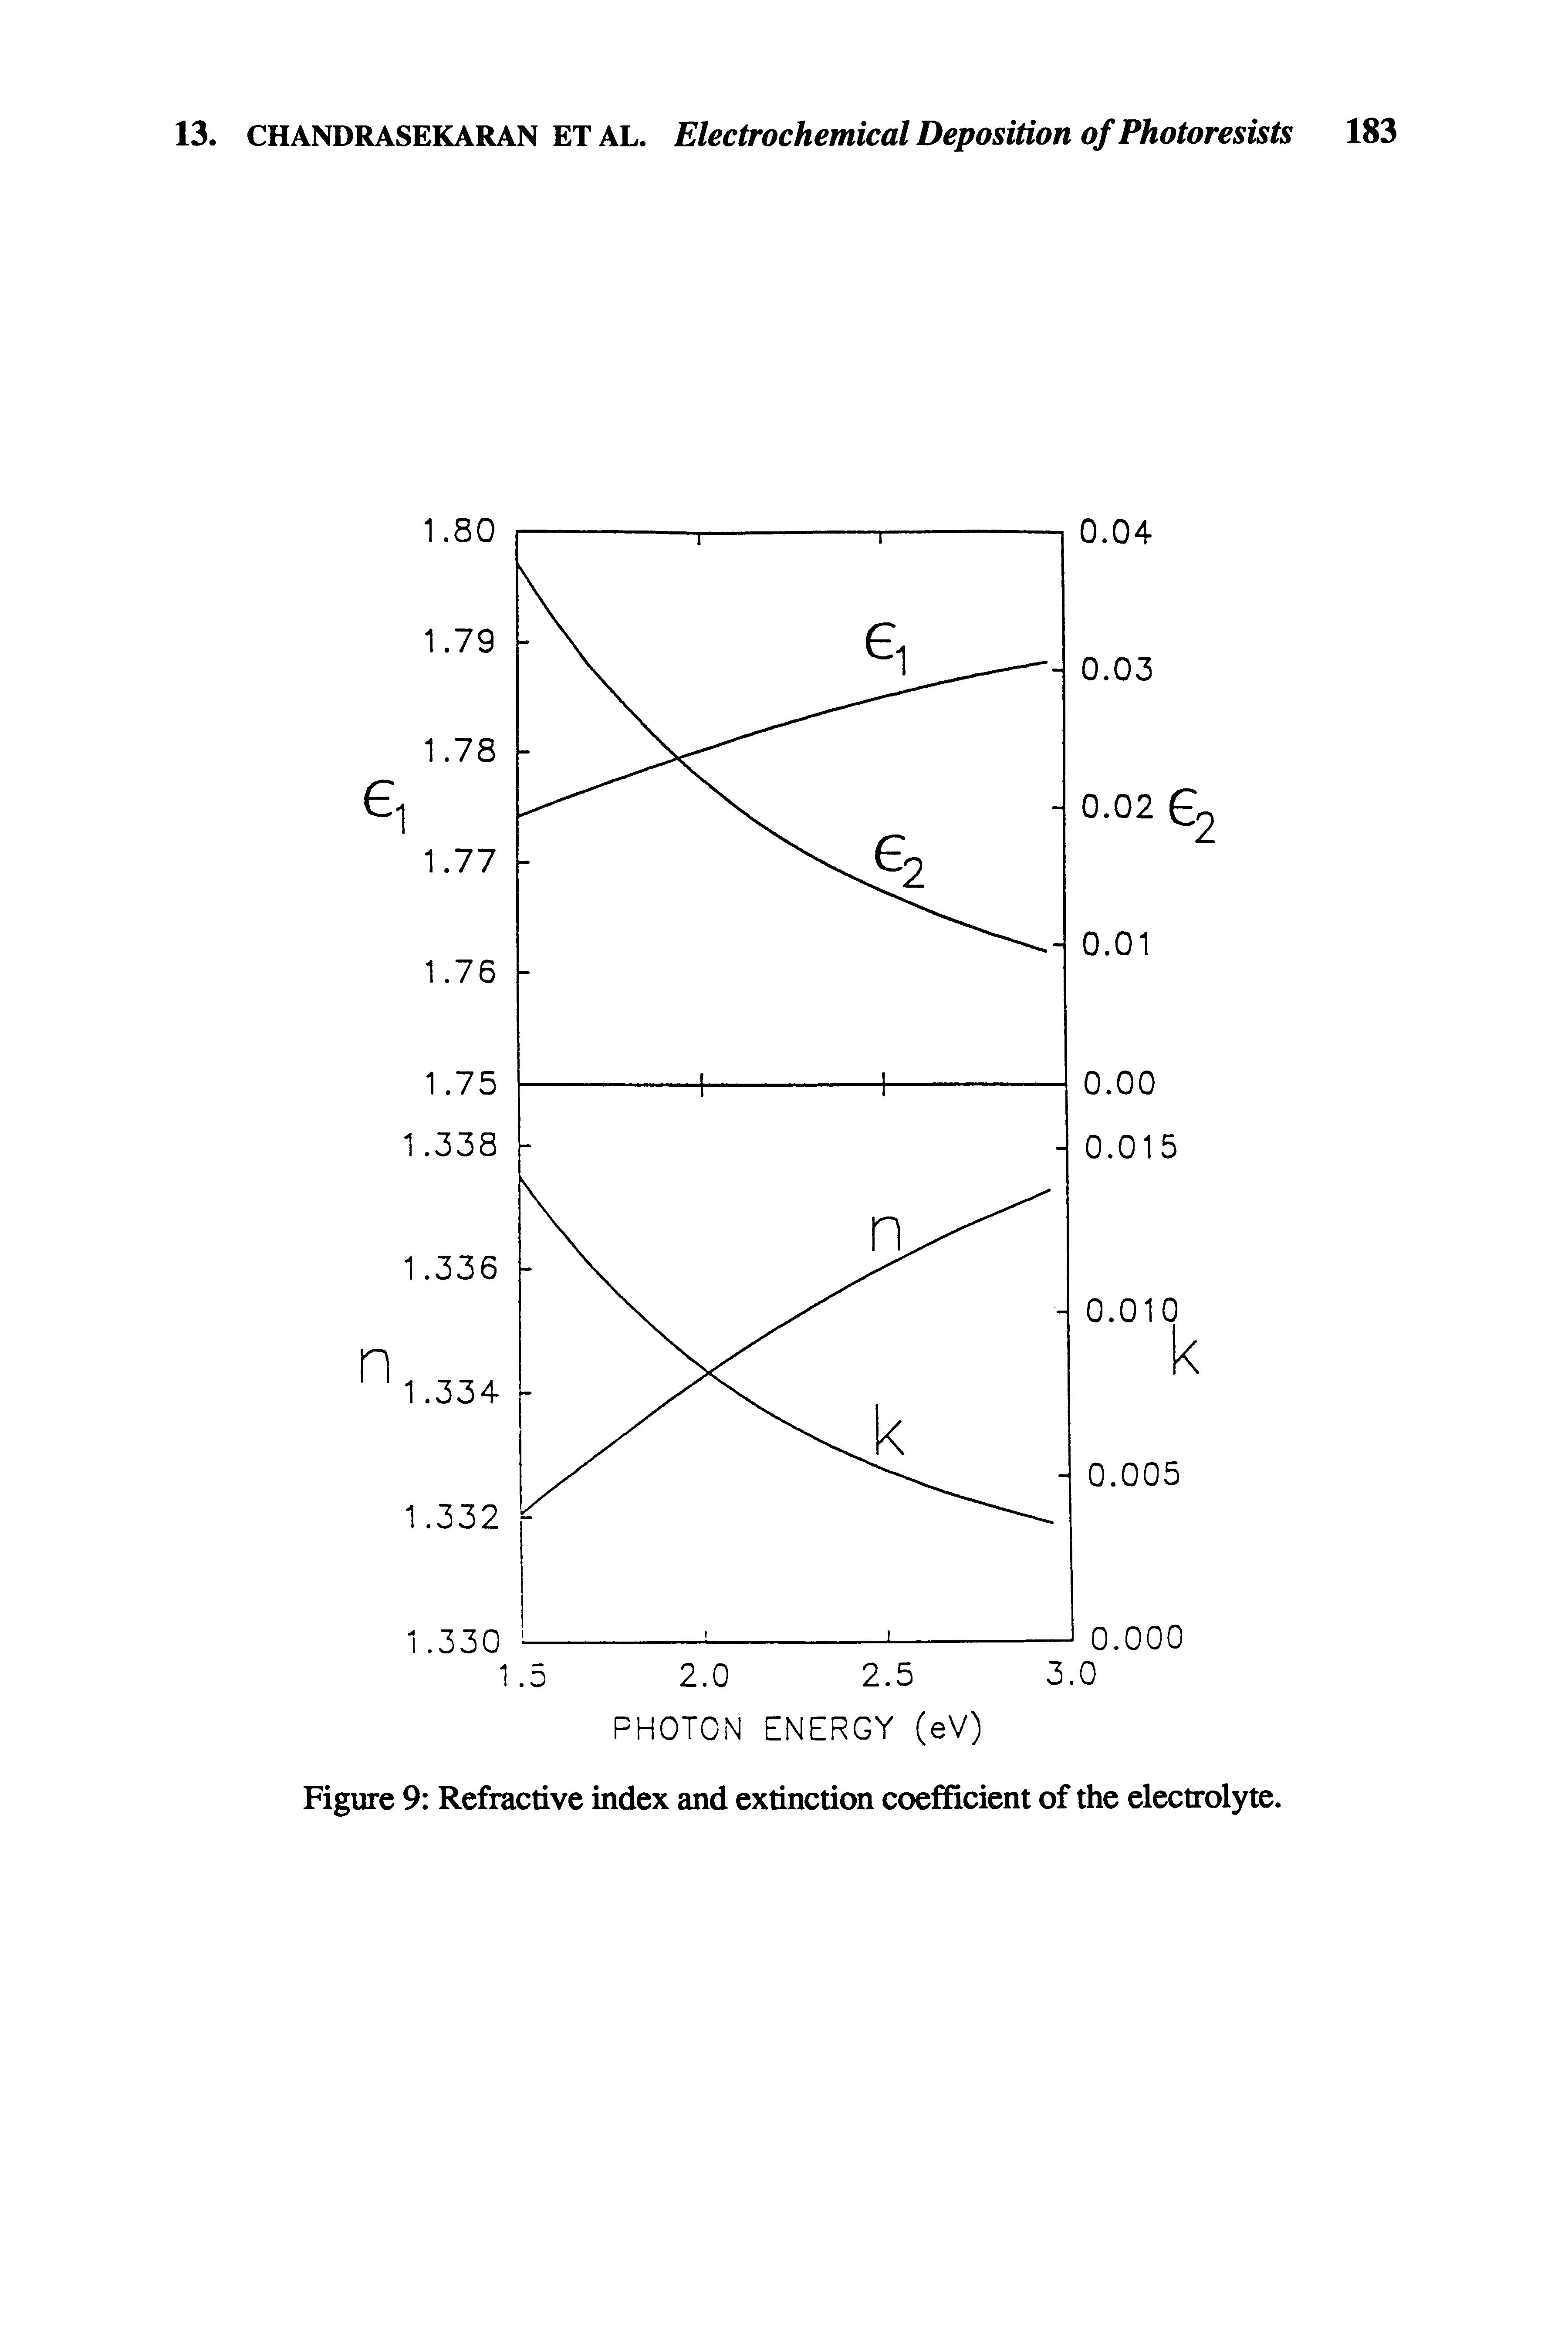 Figure 9 Refractive index and extinction coefficient of the electrolyte.